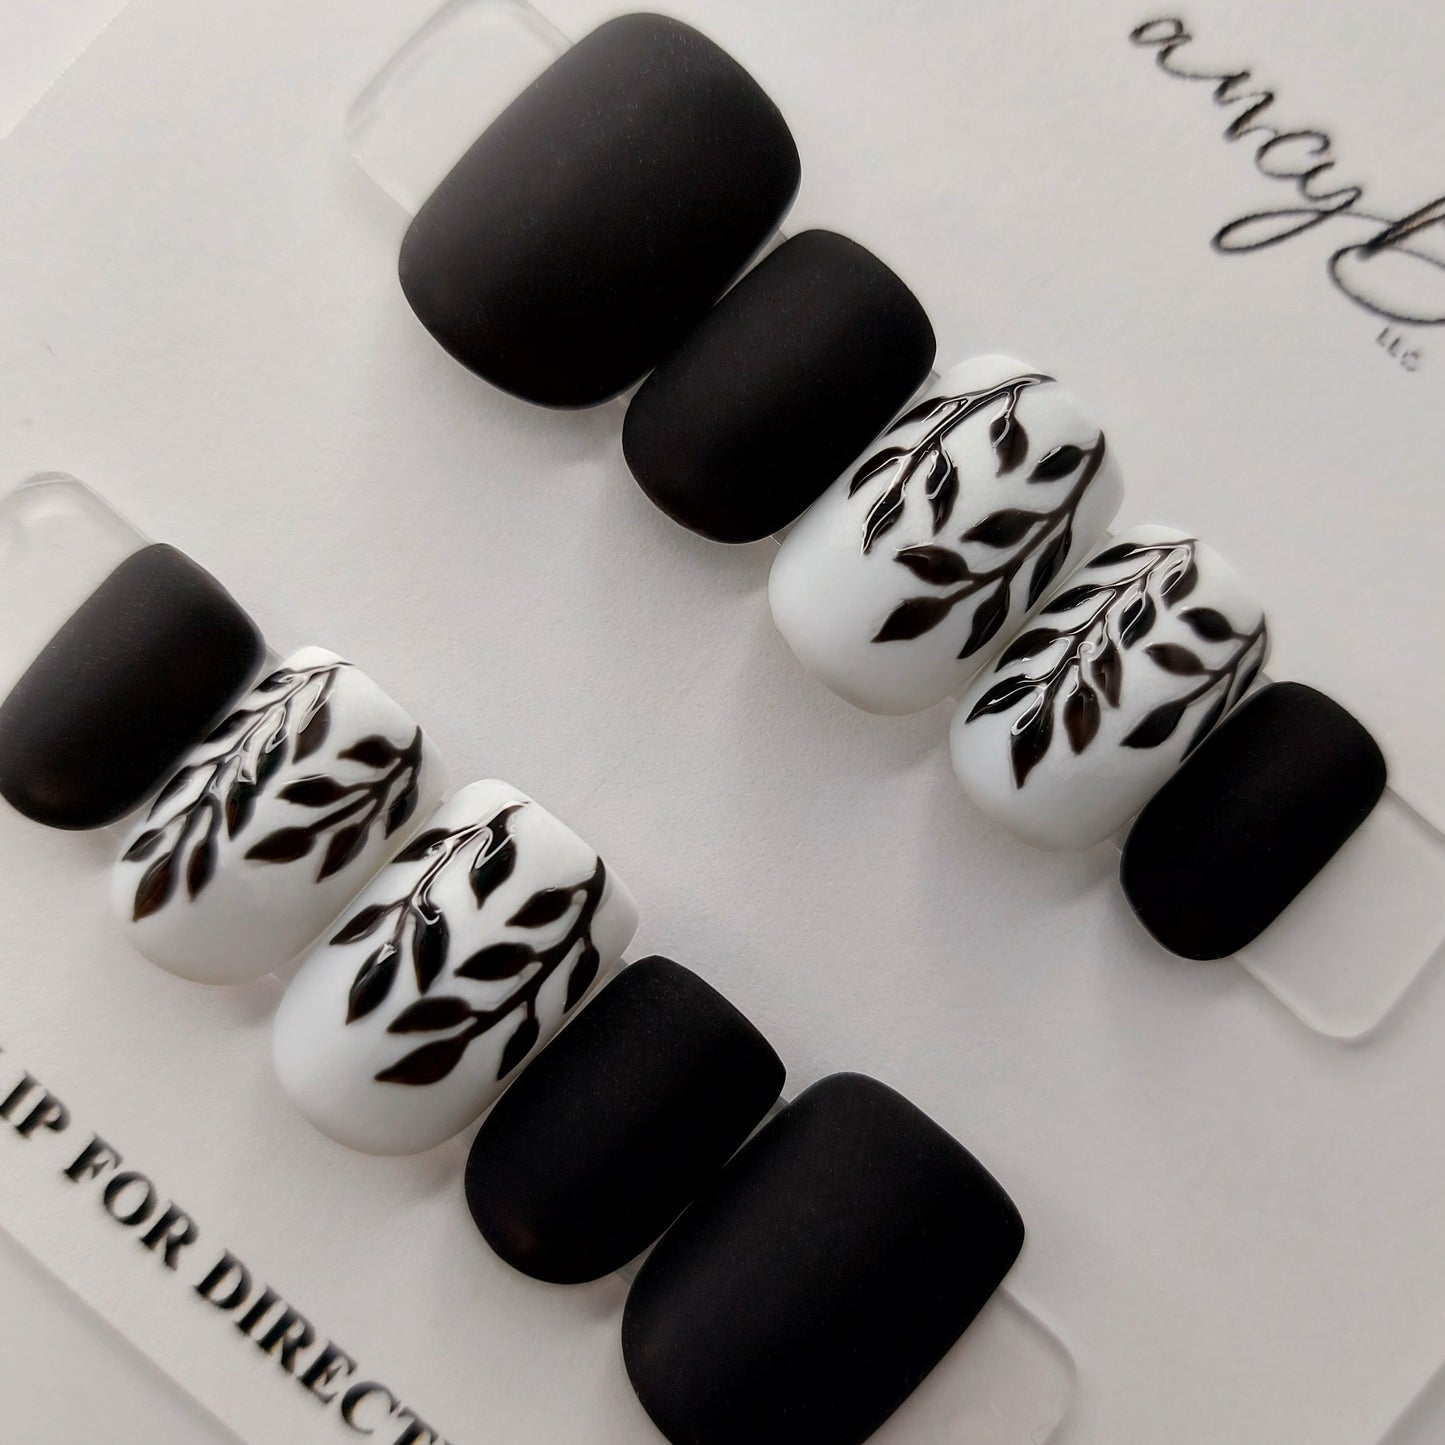 Black and white leaf nails with matte finish, a custom design that embodies elegance and simplicity, hand painted leaves finished in gloss.